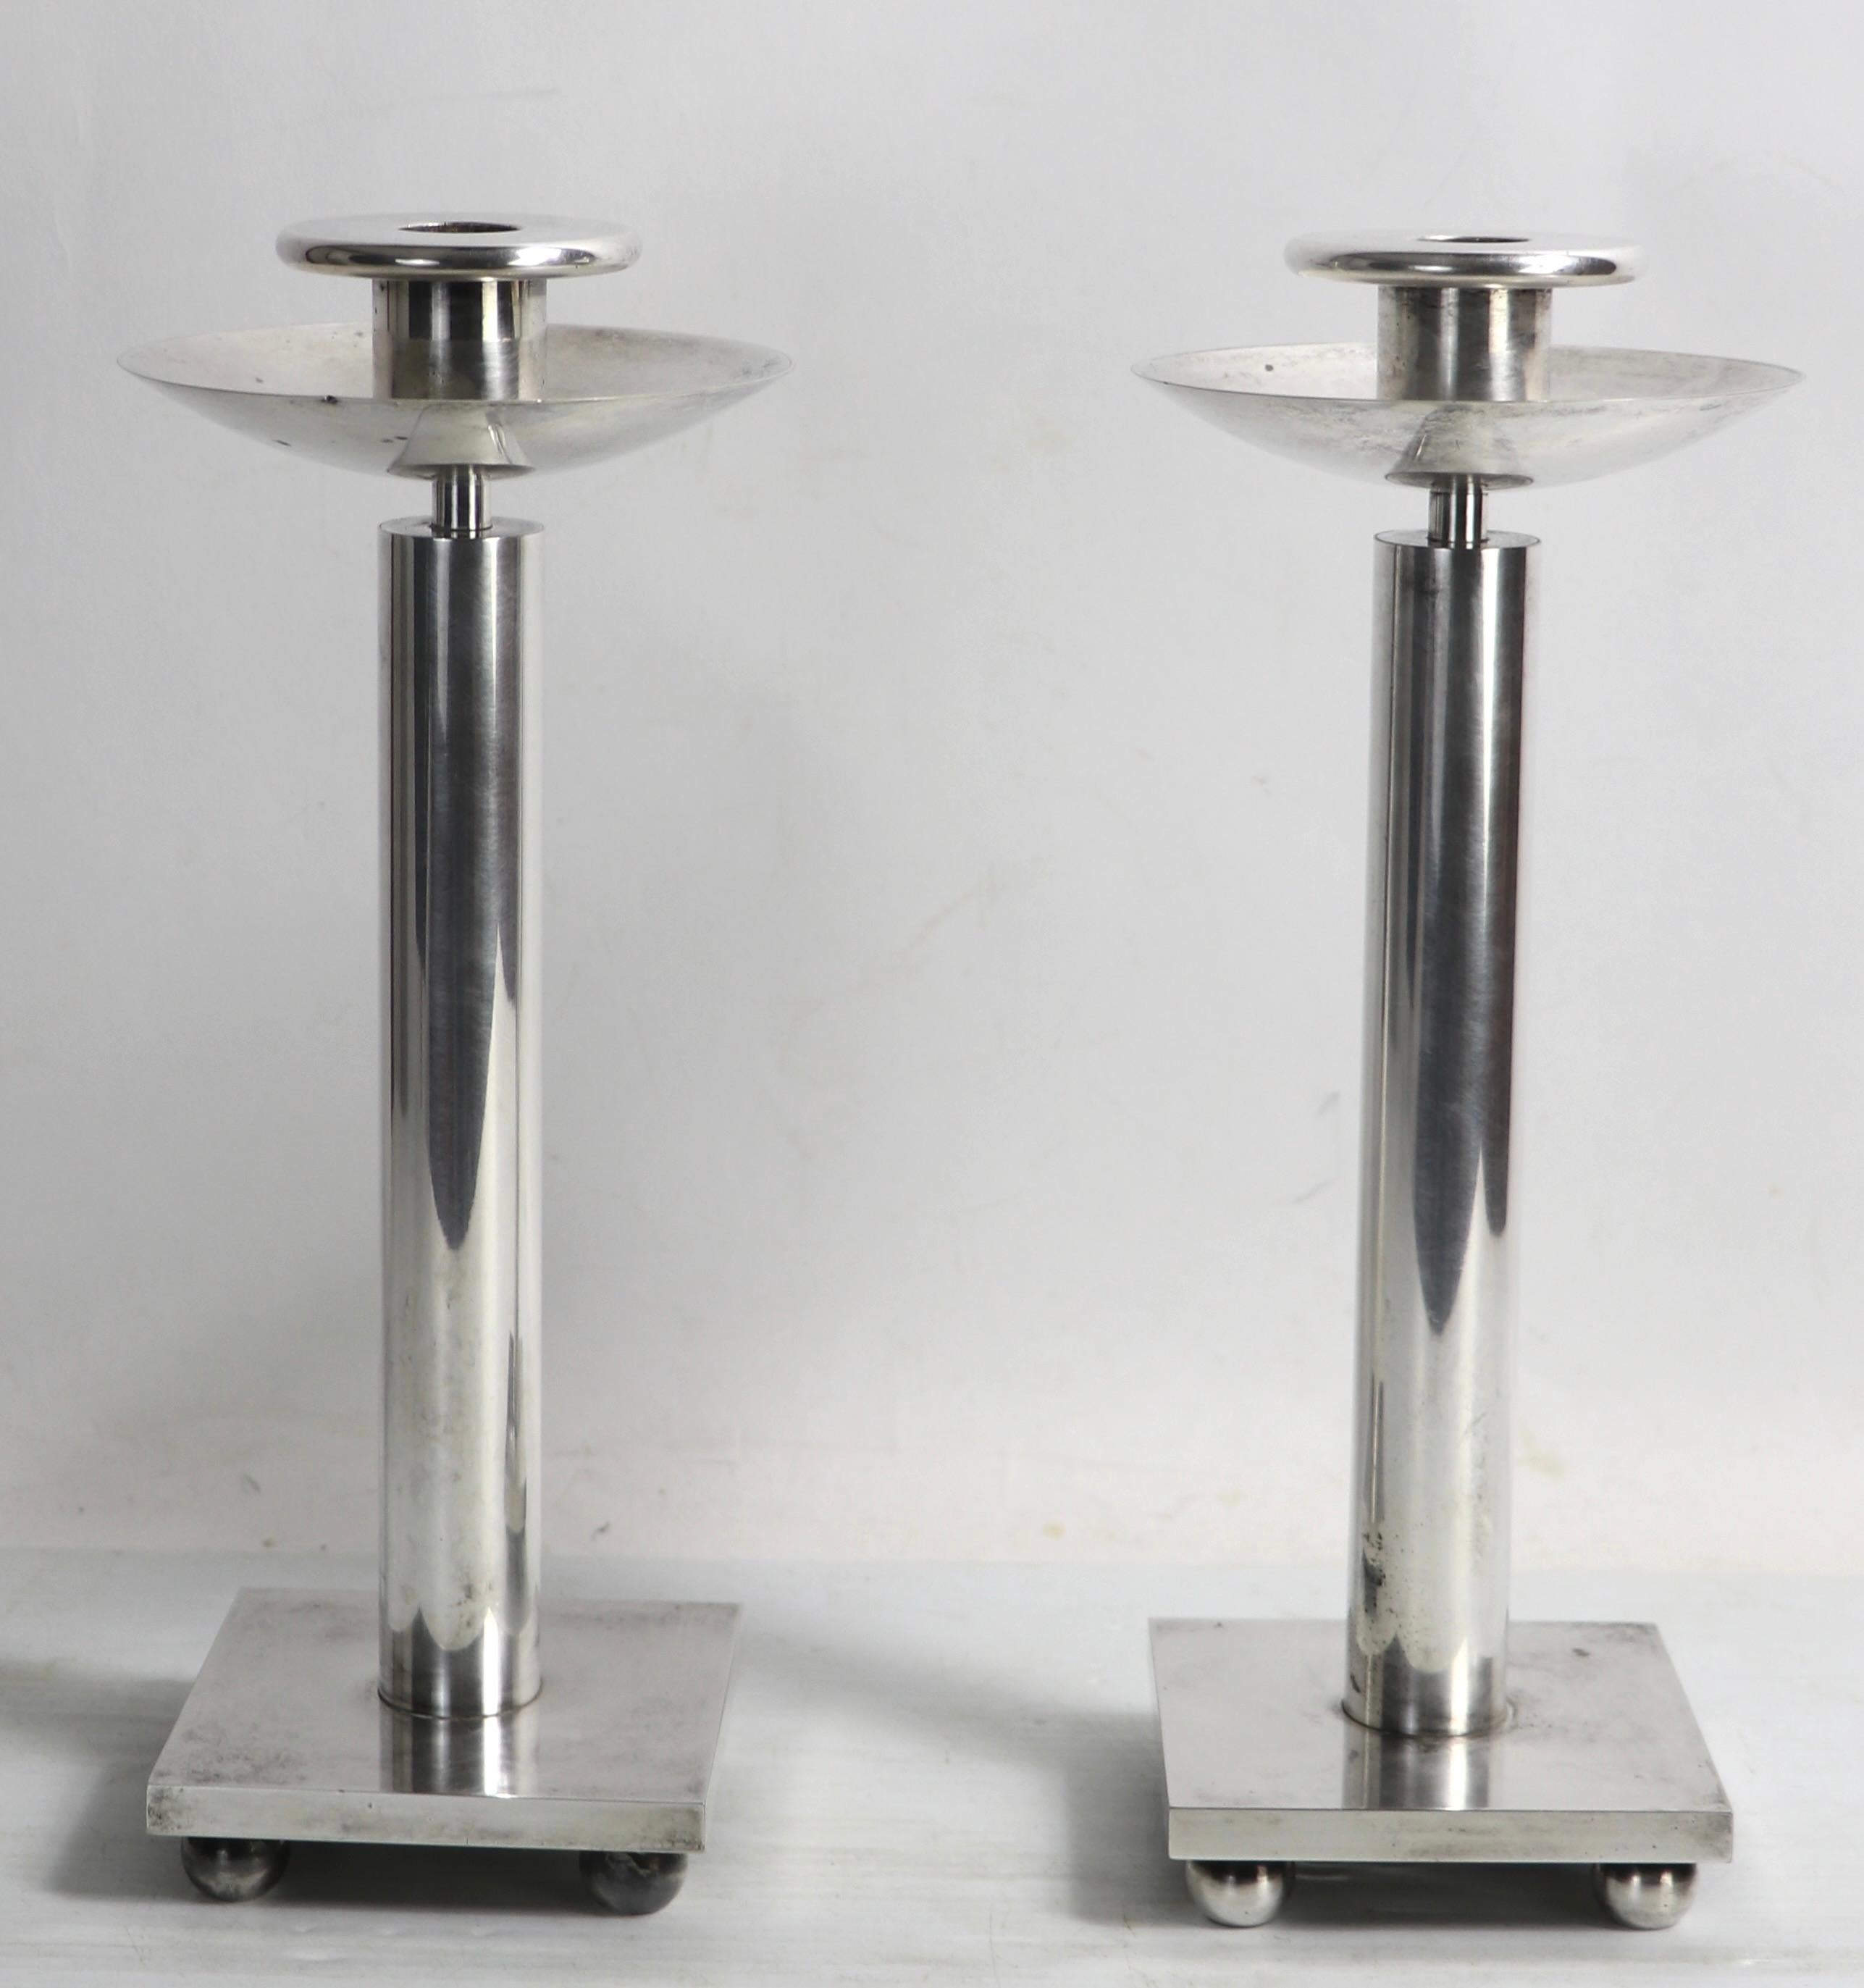 Incredible pair of post modern silver plate candlesticks, by Richard Meier for Swid Powell. Very hard to find, especially in pairs, this impressive set will complete a table setting, mantle or any interior you choose to place them in. The restrained